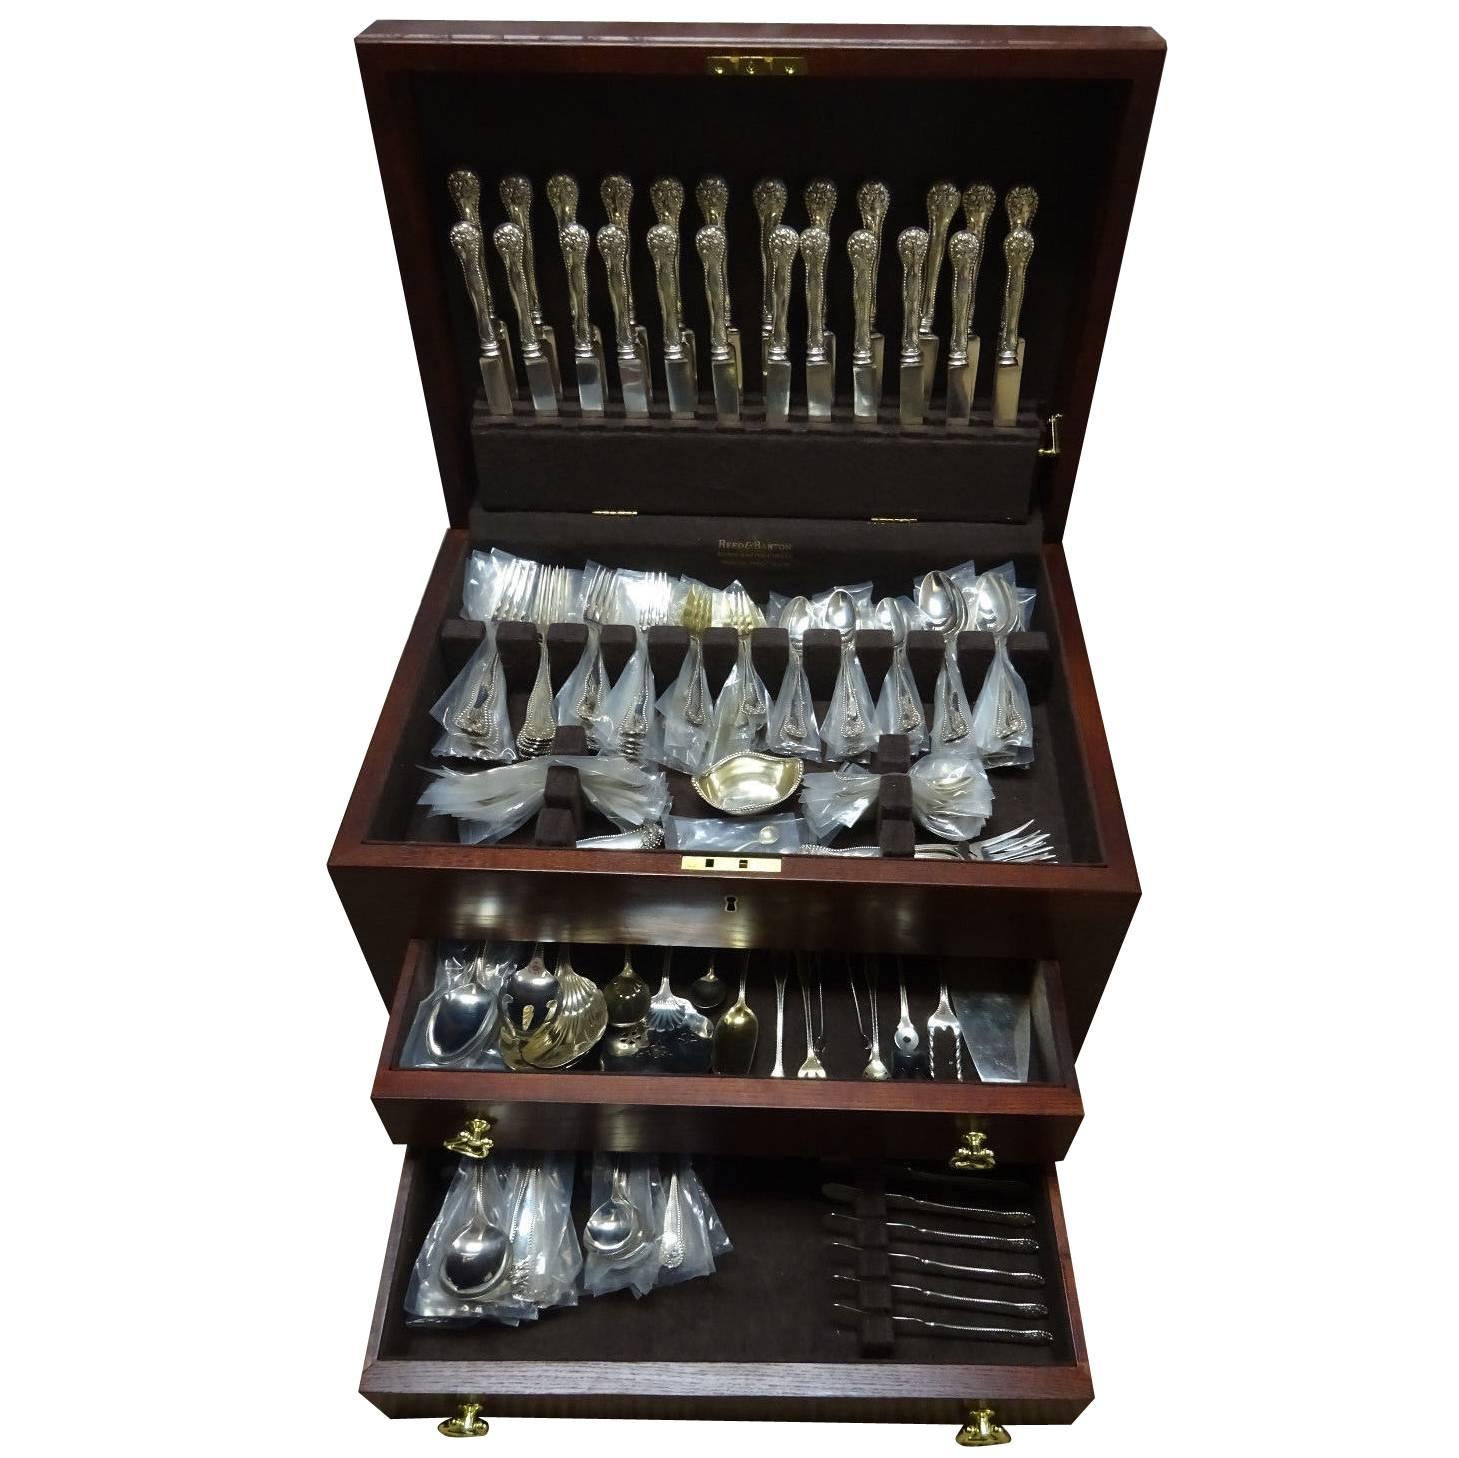 Monumental Lancaster by Gorham sterling silver dinner and luncheon flatware set of 172 pieces. This wonderful, beaded pattern with rose detailing was introduced by Gorham in the year 1897. This set includes:

12 dinner size knives, 9 5/8